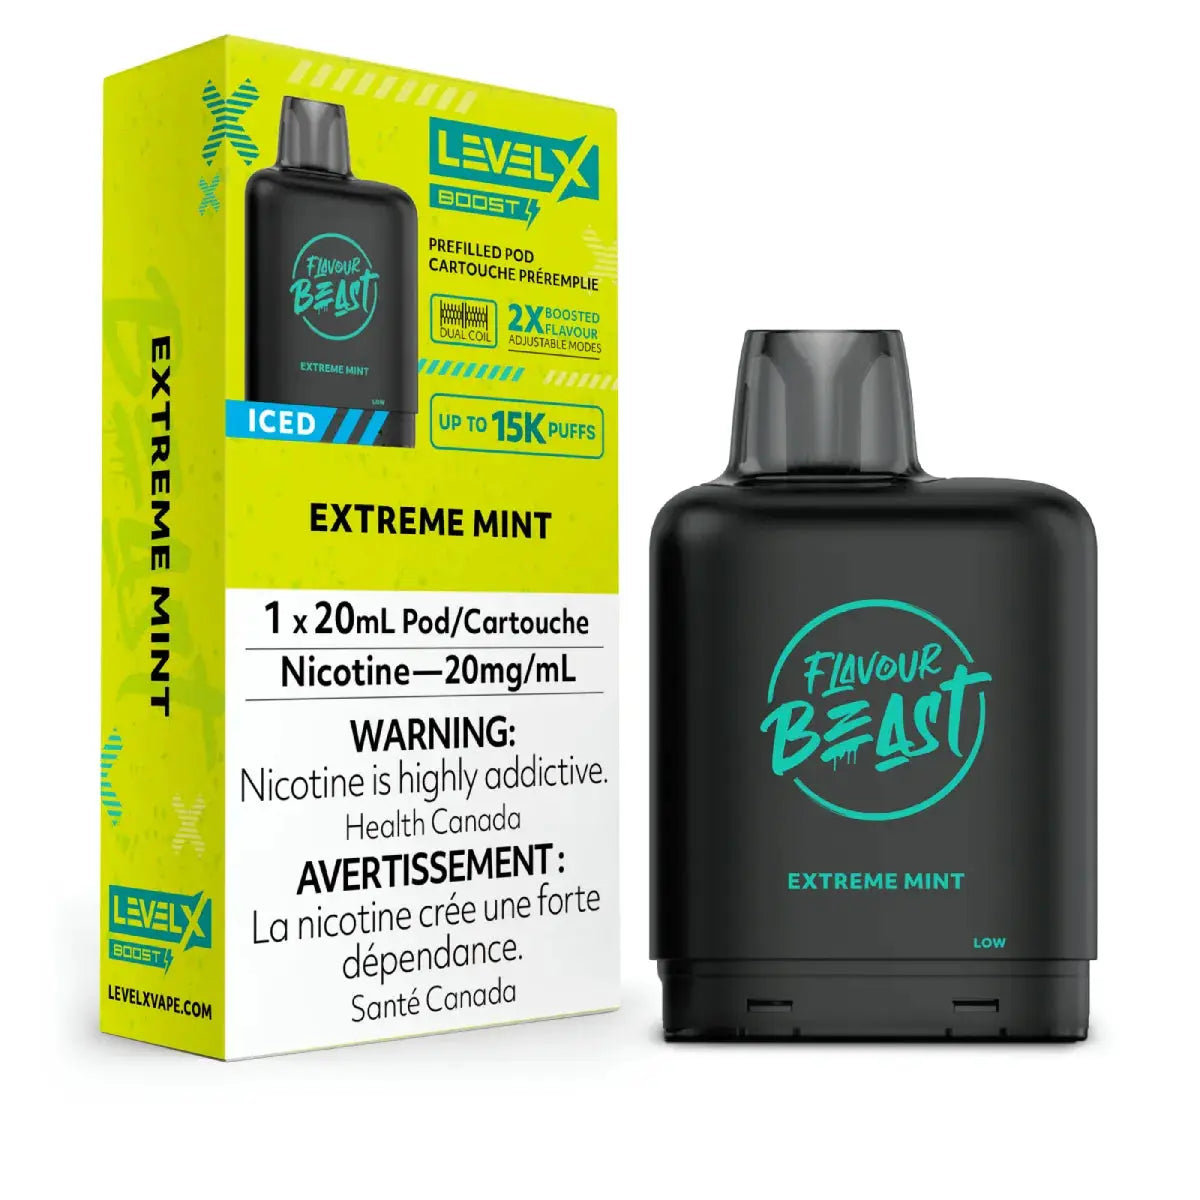 Level X Flavour Beast Boost Pod 20mg Excusez Moi